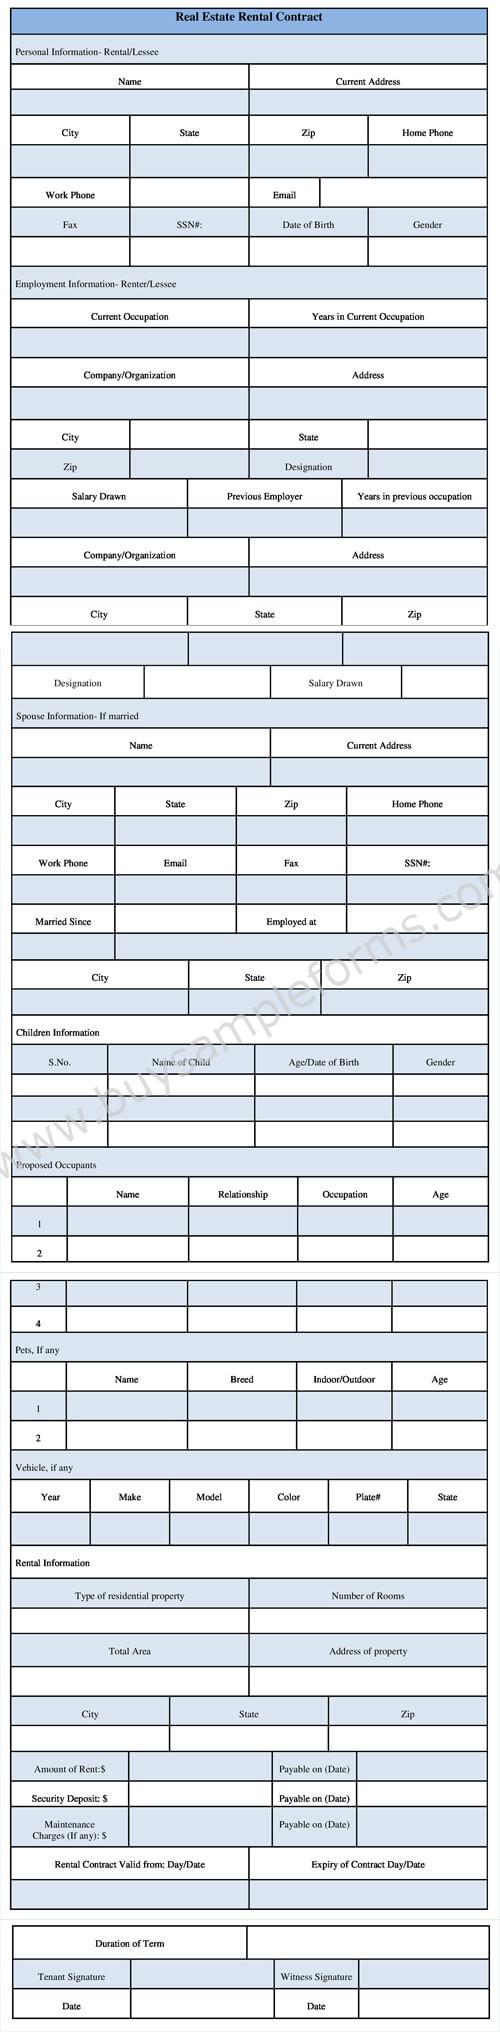 Real Estate Rental Contract Form Word - Rental Lease Agreement Template Sample example